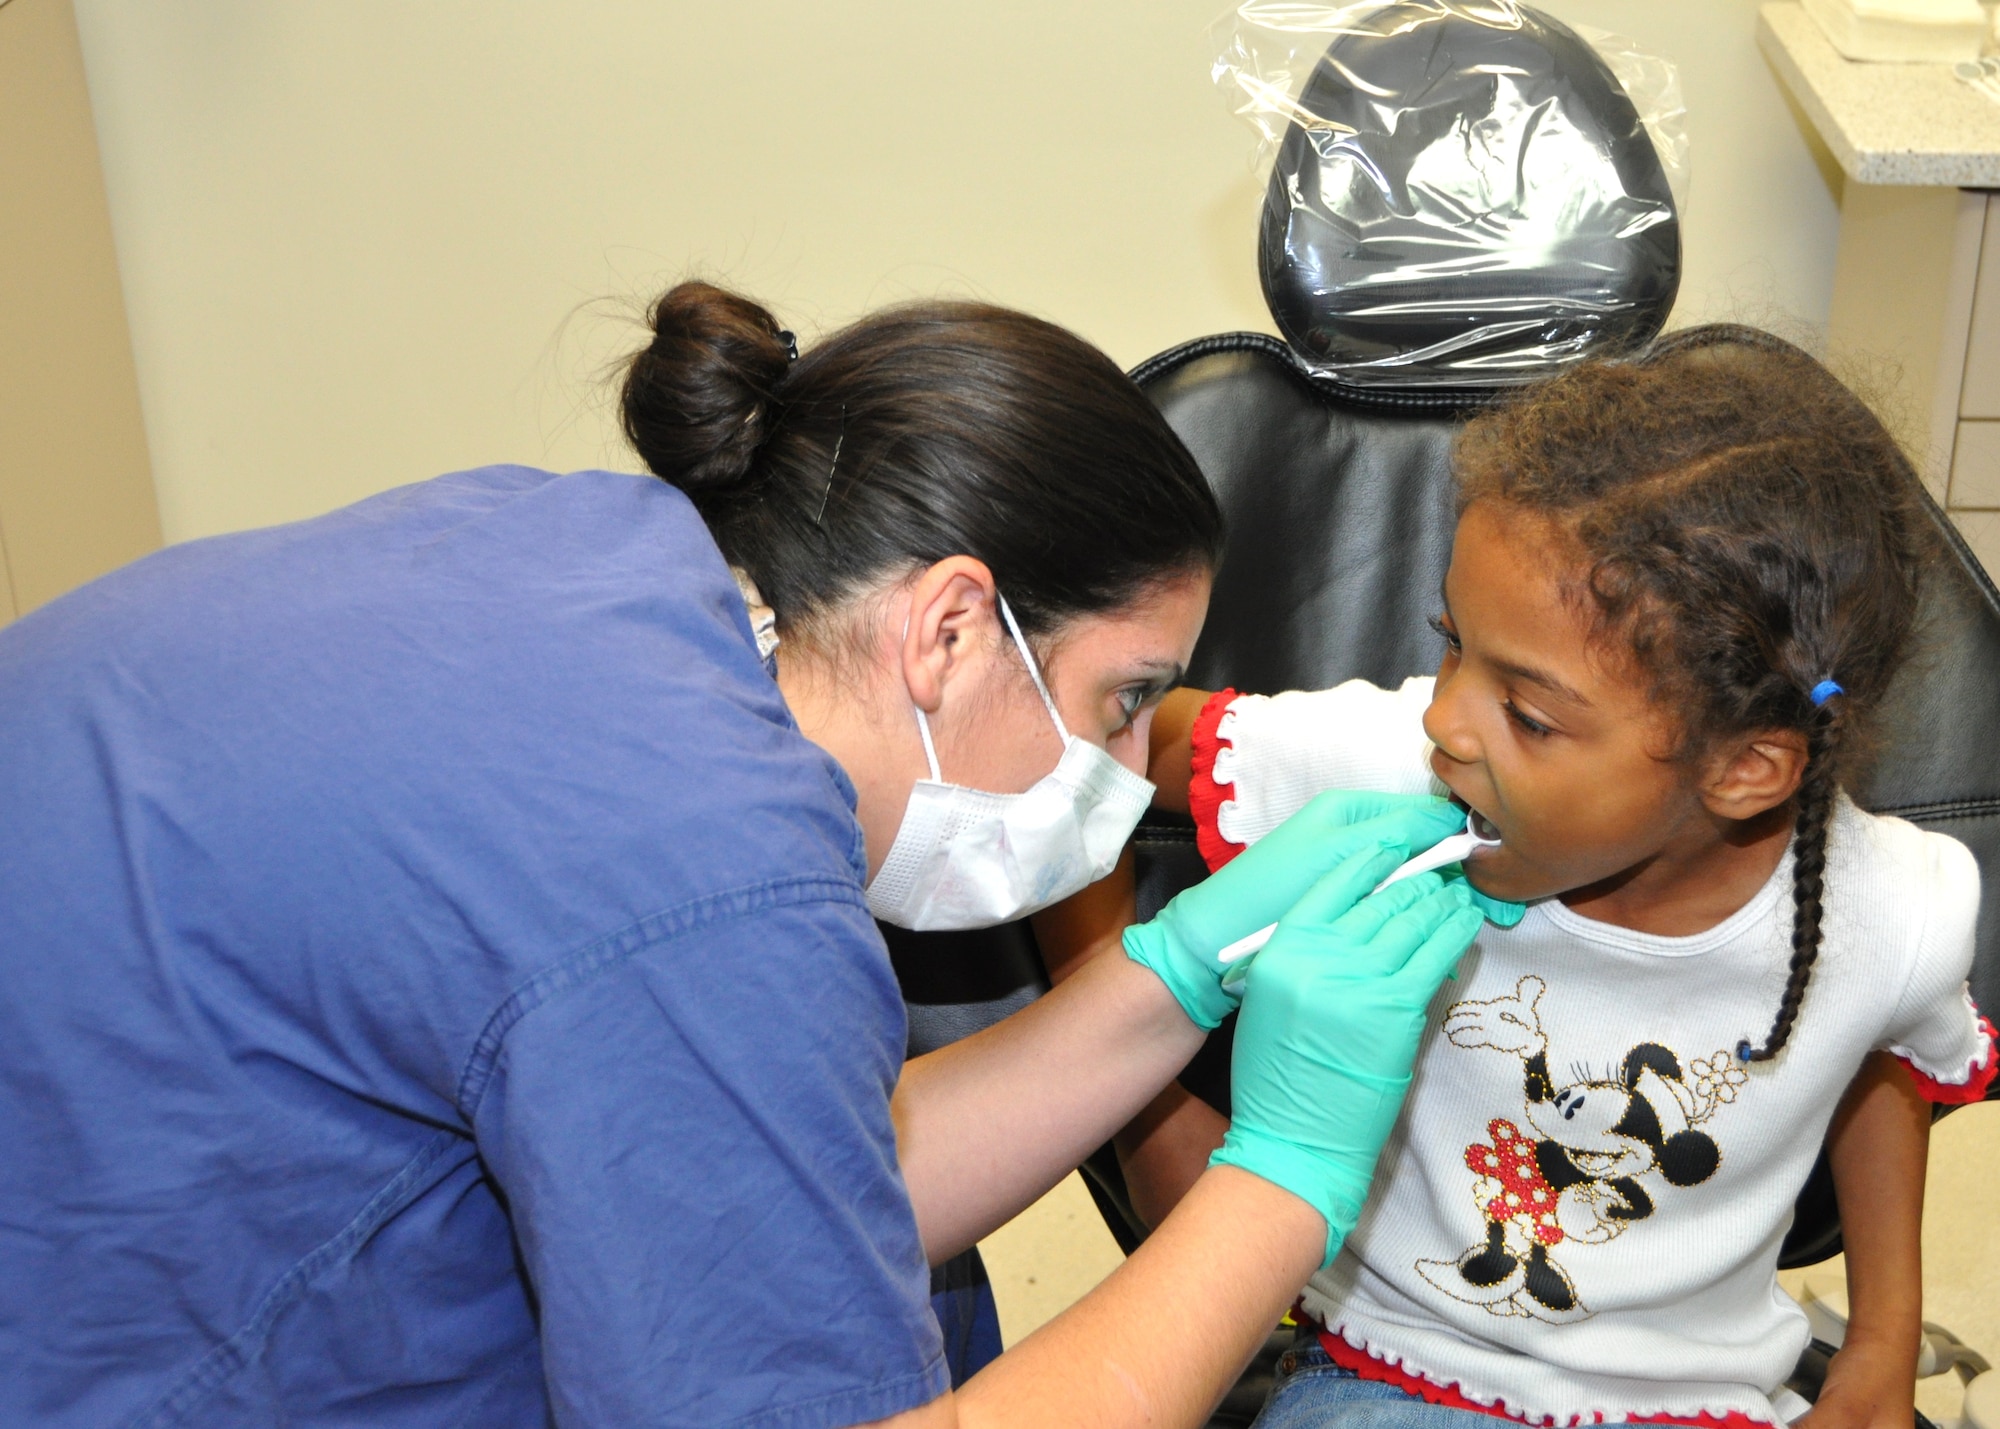 Capt. (Dr.) Erin McNamara examines Tabitha Smith’s teeth during the Feb. 4 “Give Kids A Smile” Day. Tabitha, 6, is the daughter of Suzette and the late Clive Smith, a retired soldier.  (U.S. Air Force photo by Steve Pivnick)